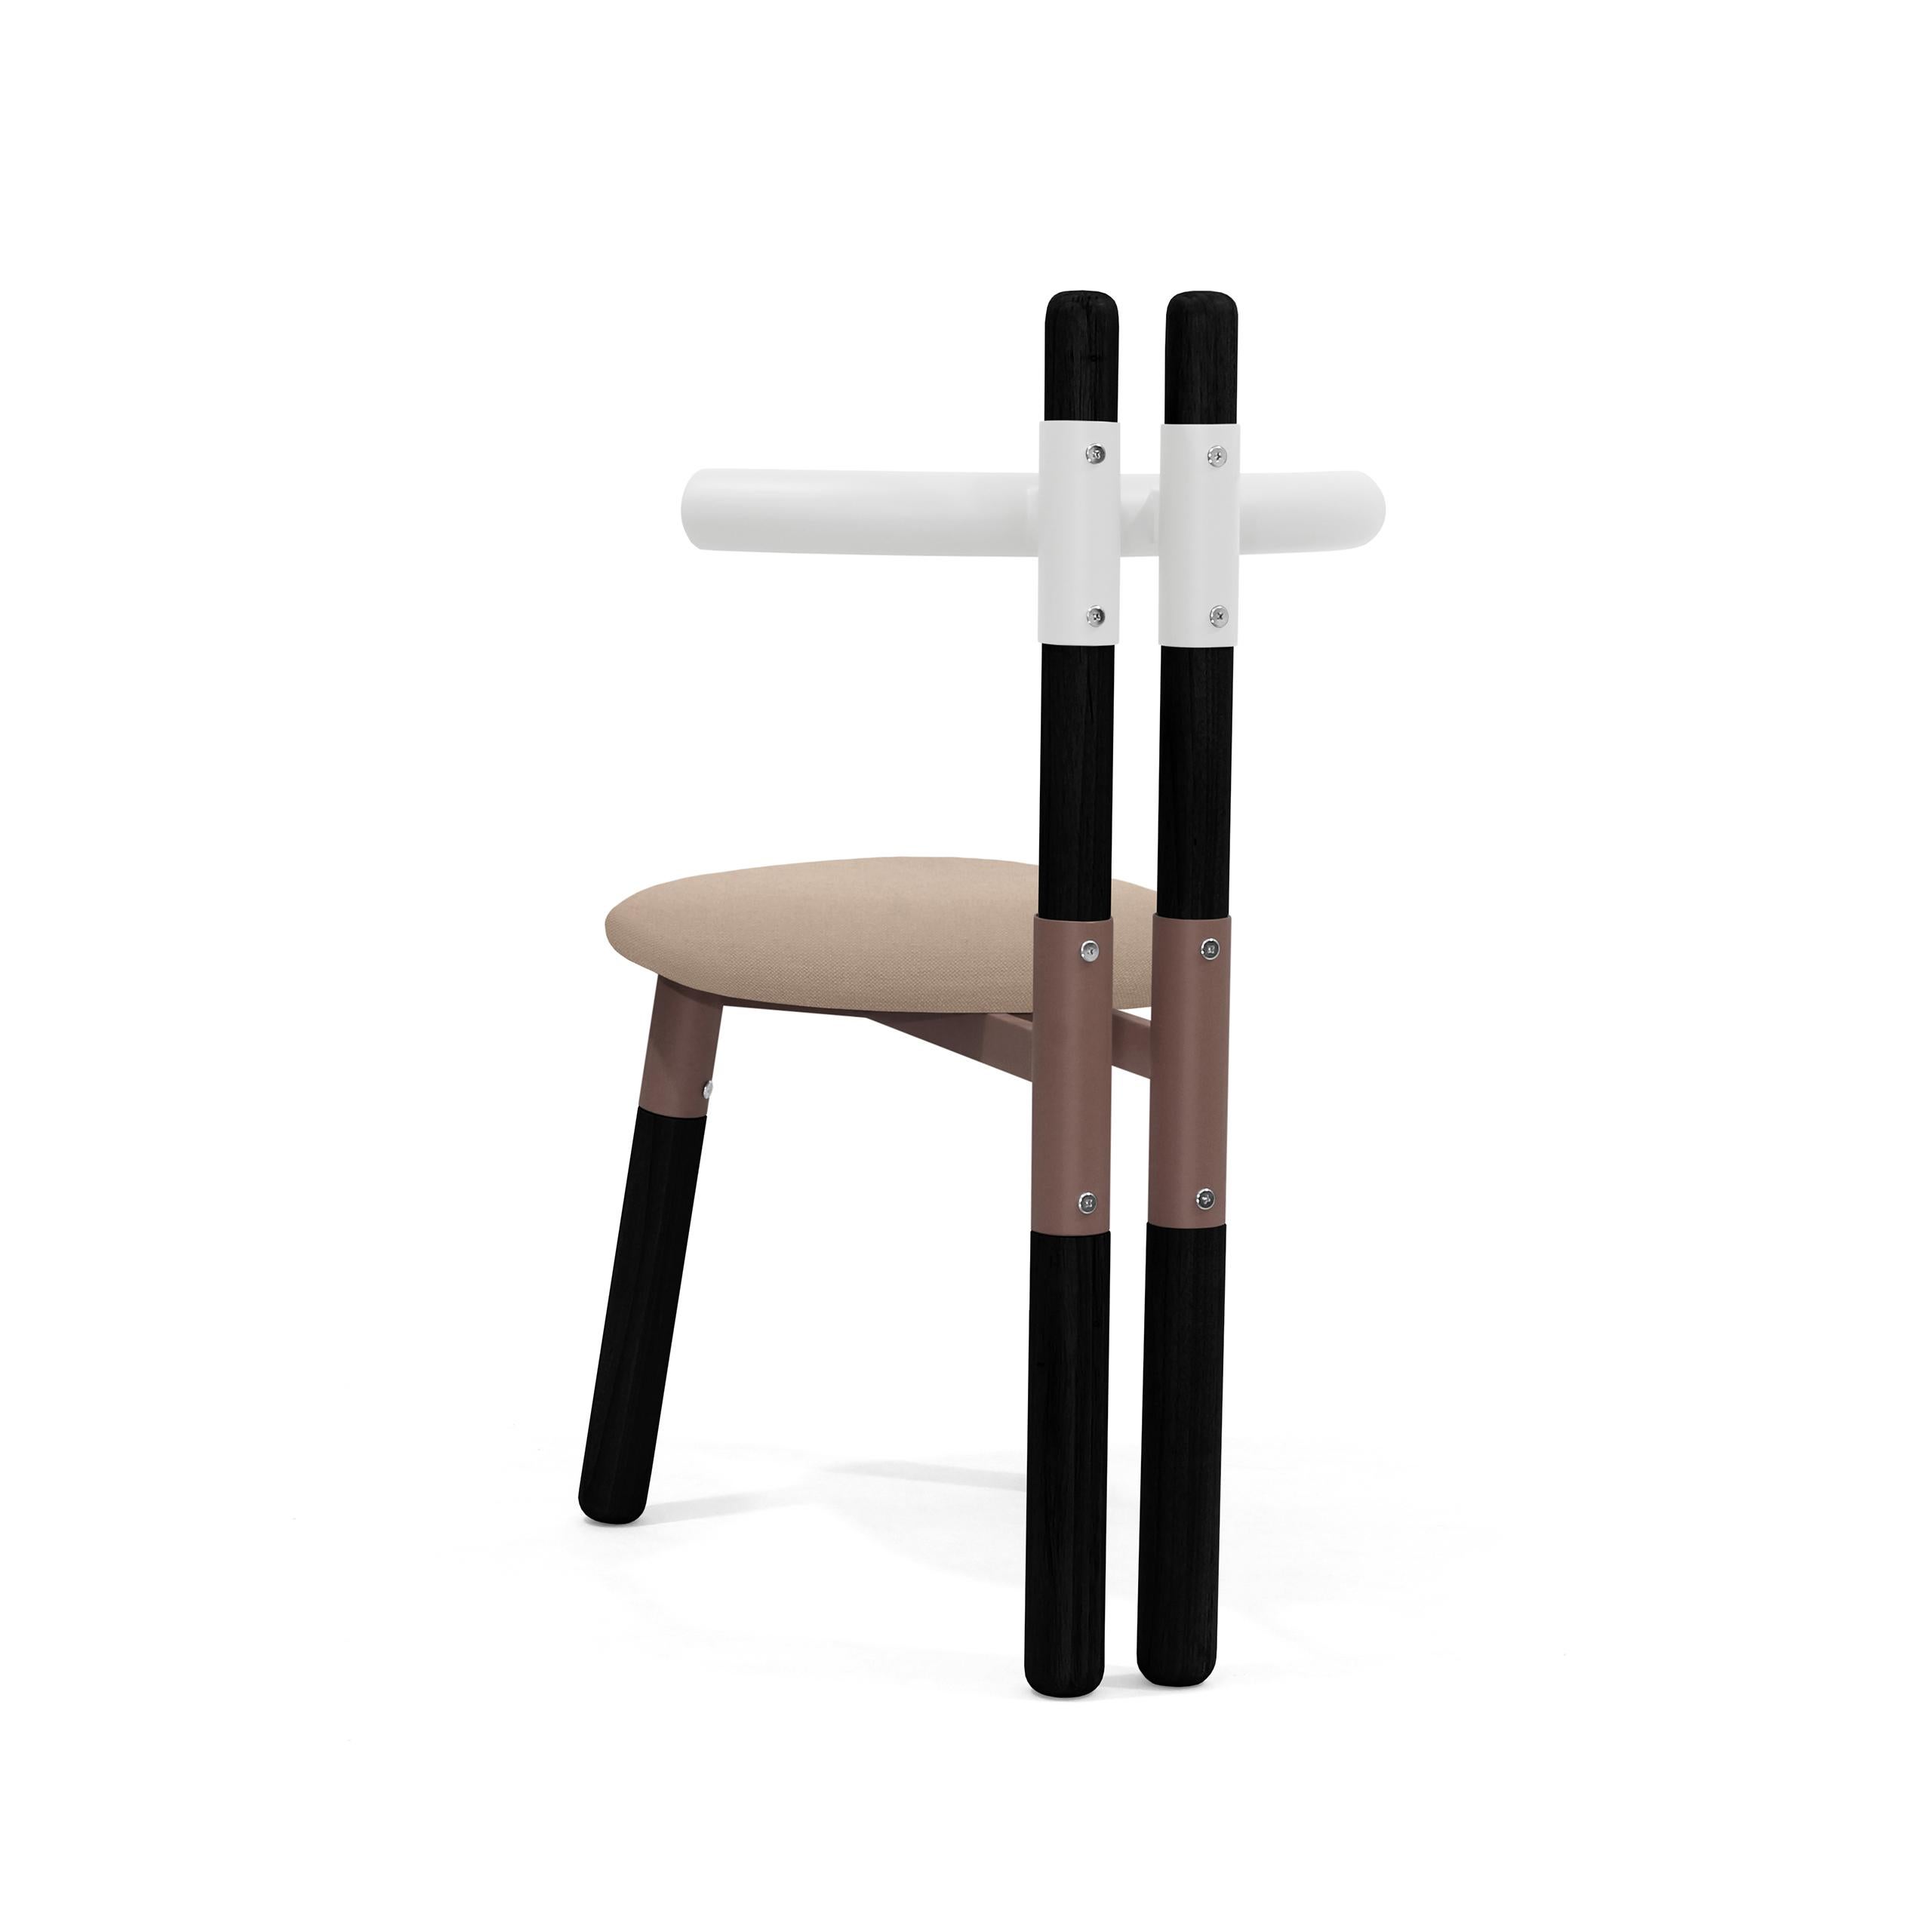 Upholstered PK12 Chair, Bicolor Steel Structure & Ebonized Legs by Paulo Kobylka In New Condition For Sale In Londrina, Paraná